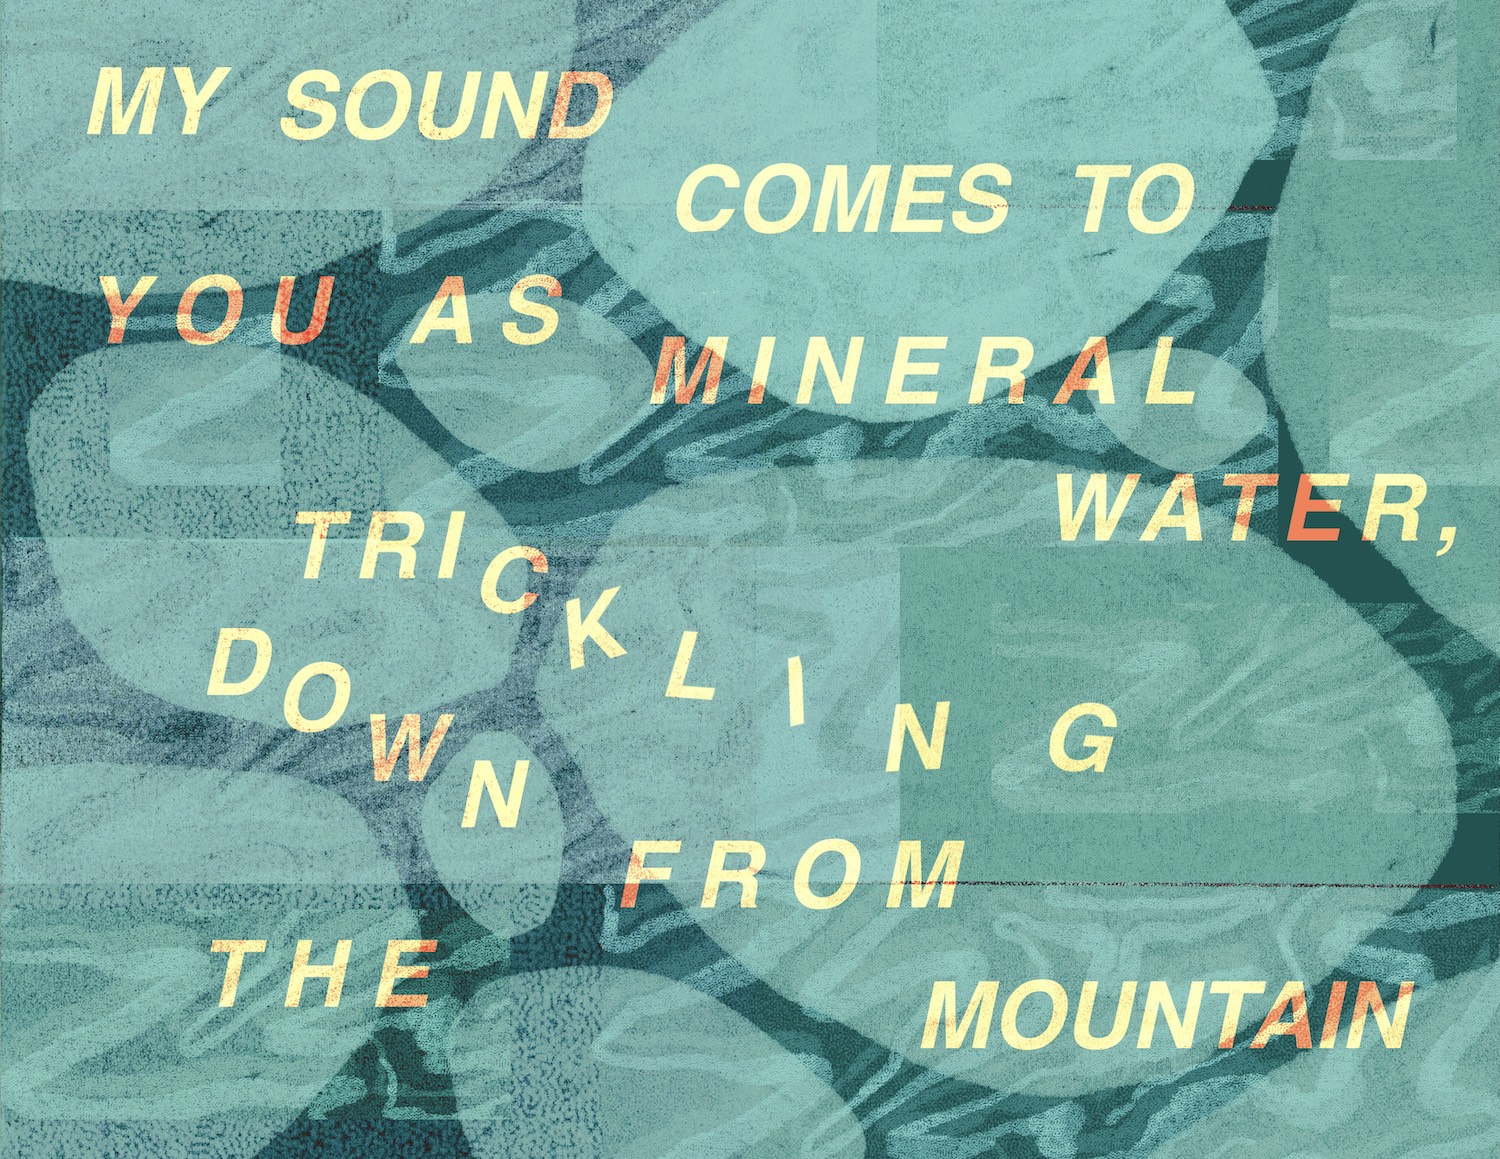 In the final panel of Ariana Martinez’s Not Just a Cut, the whole image is now a mix of green and blue. The light shadows of stones fill the watery scene, ripples moving over and around them. Yellow text is playfully overlayed, tumbling down the screen like the flow of water. It reads, My sound comes to you as mineral water, trickling down from the mountain.